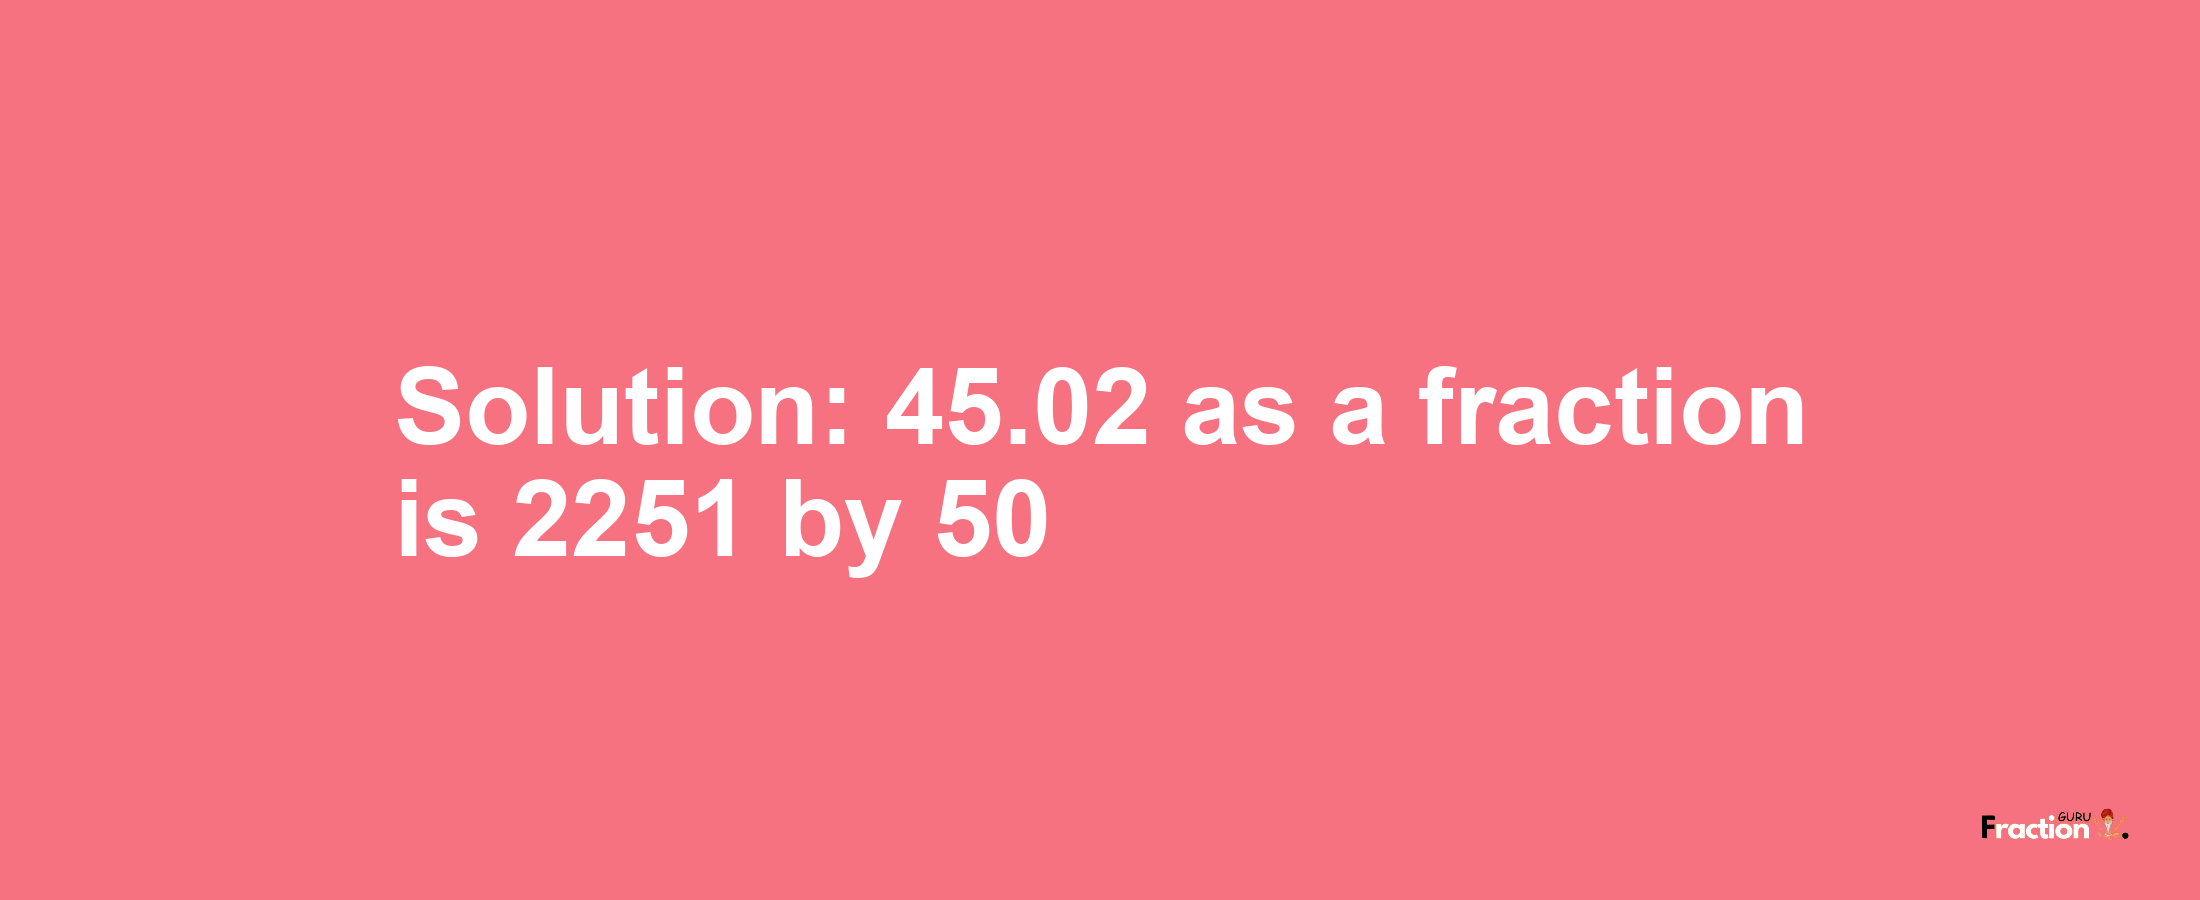 Solution:45.02 as a fraction is 2251/50